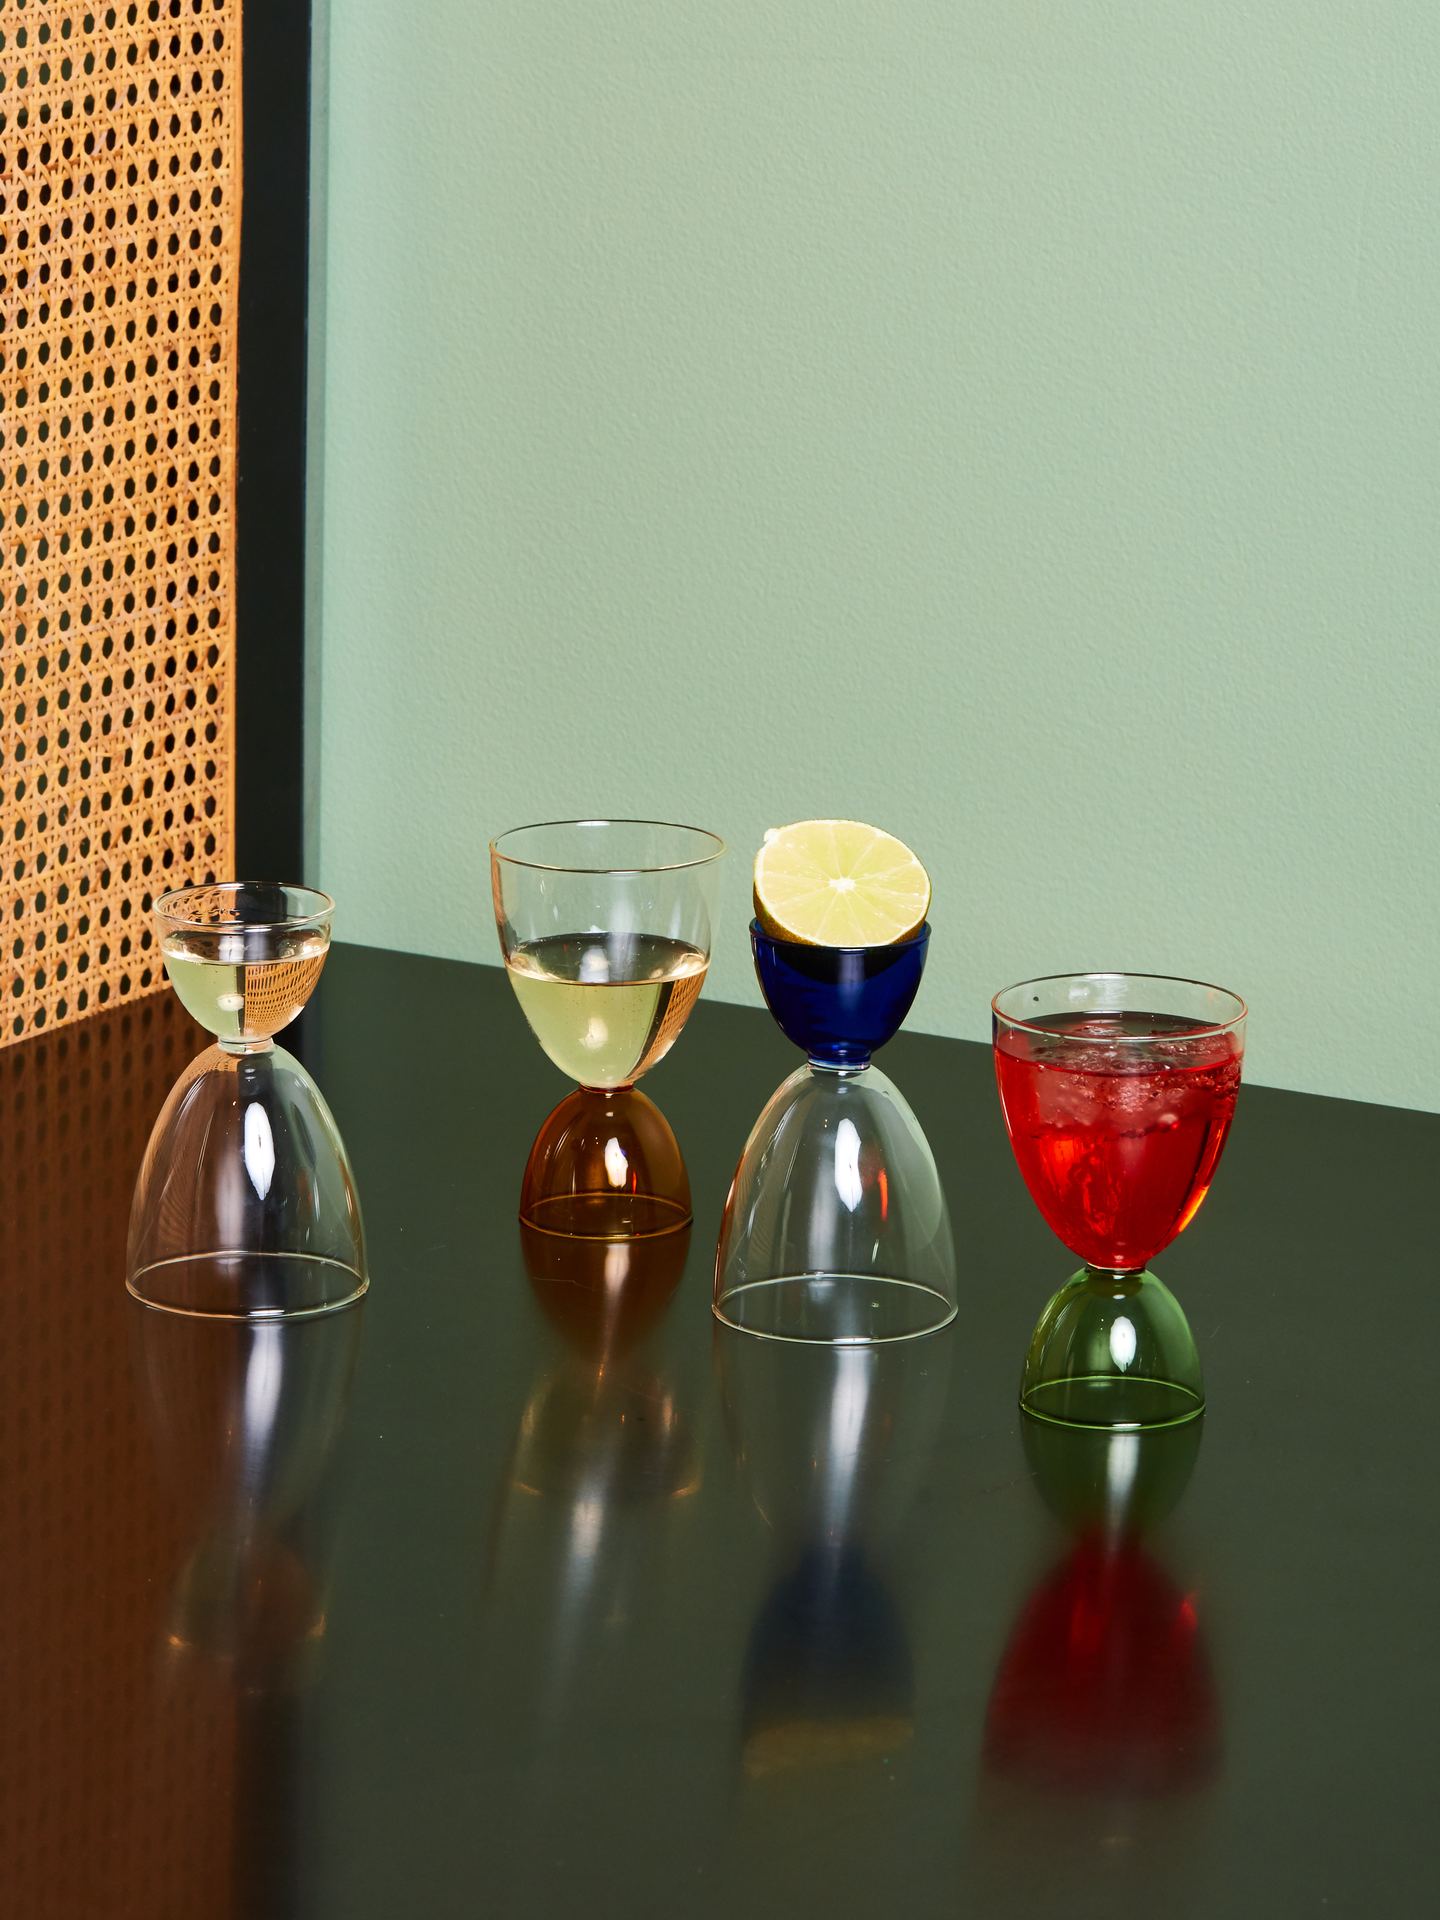 The Best 2-in-1 Decor Is Shaped Like an Hourglass